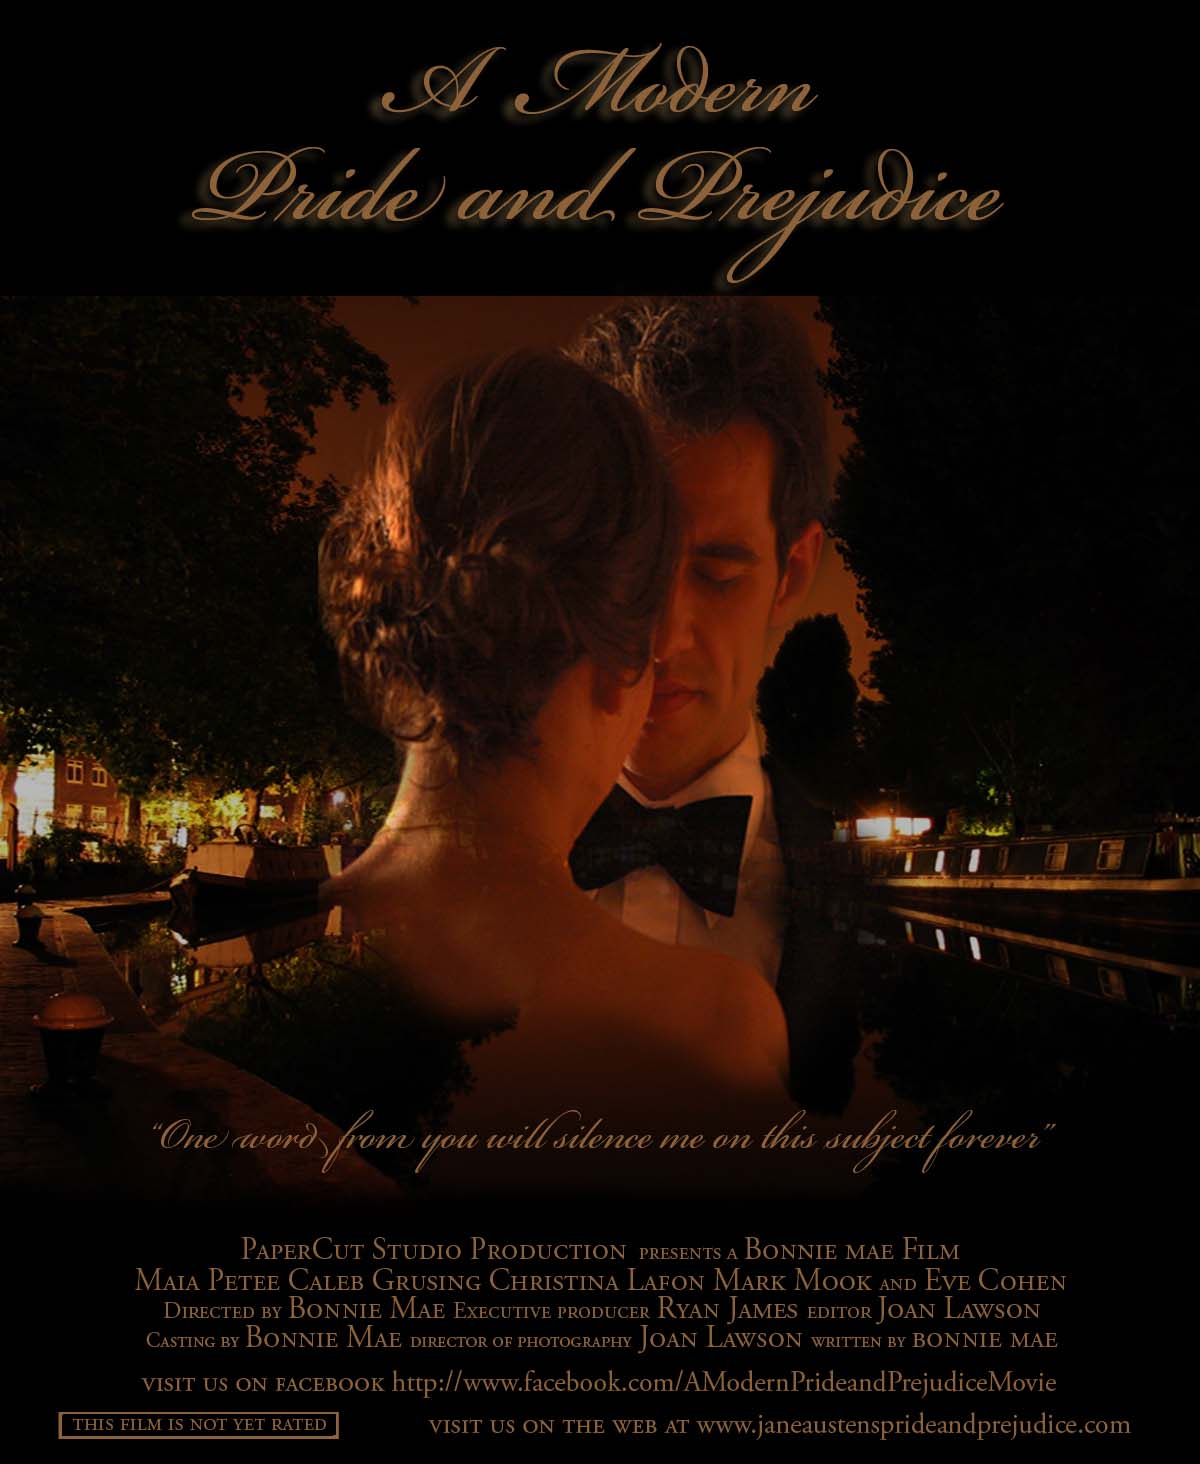 PandP Blog Exclusive Watch The first trailer for A Modern Pride and Prejudice starring Maia Petee and Caleb Grusing